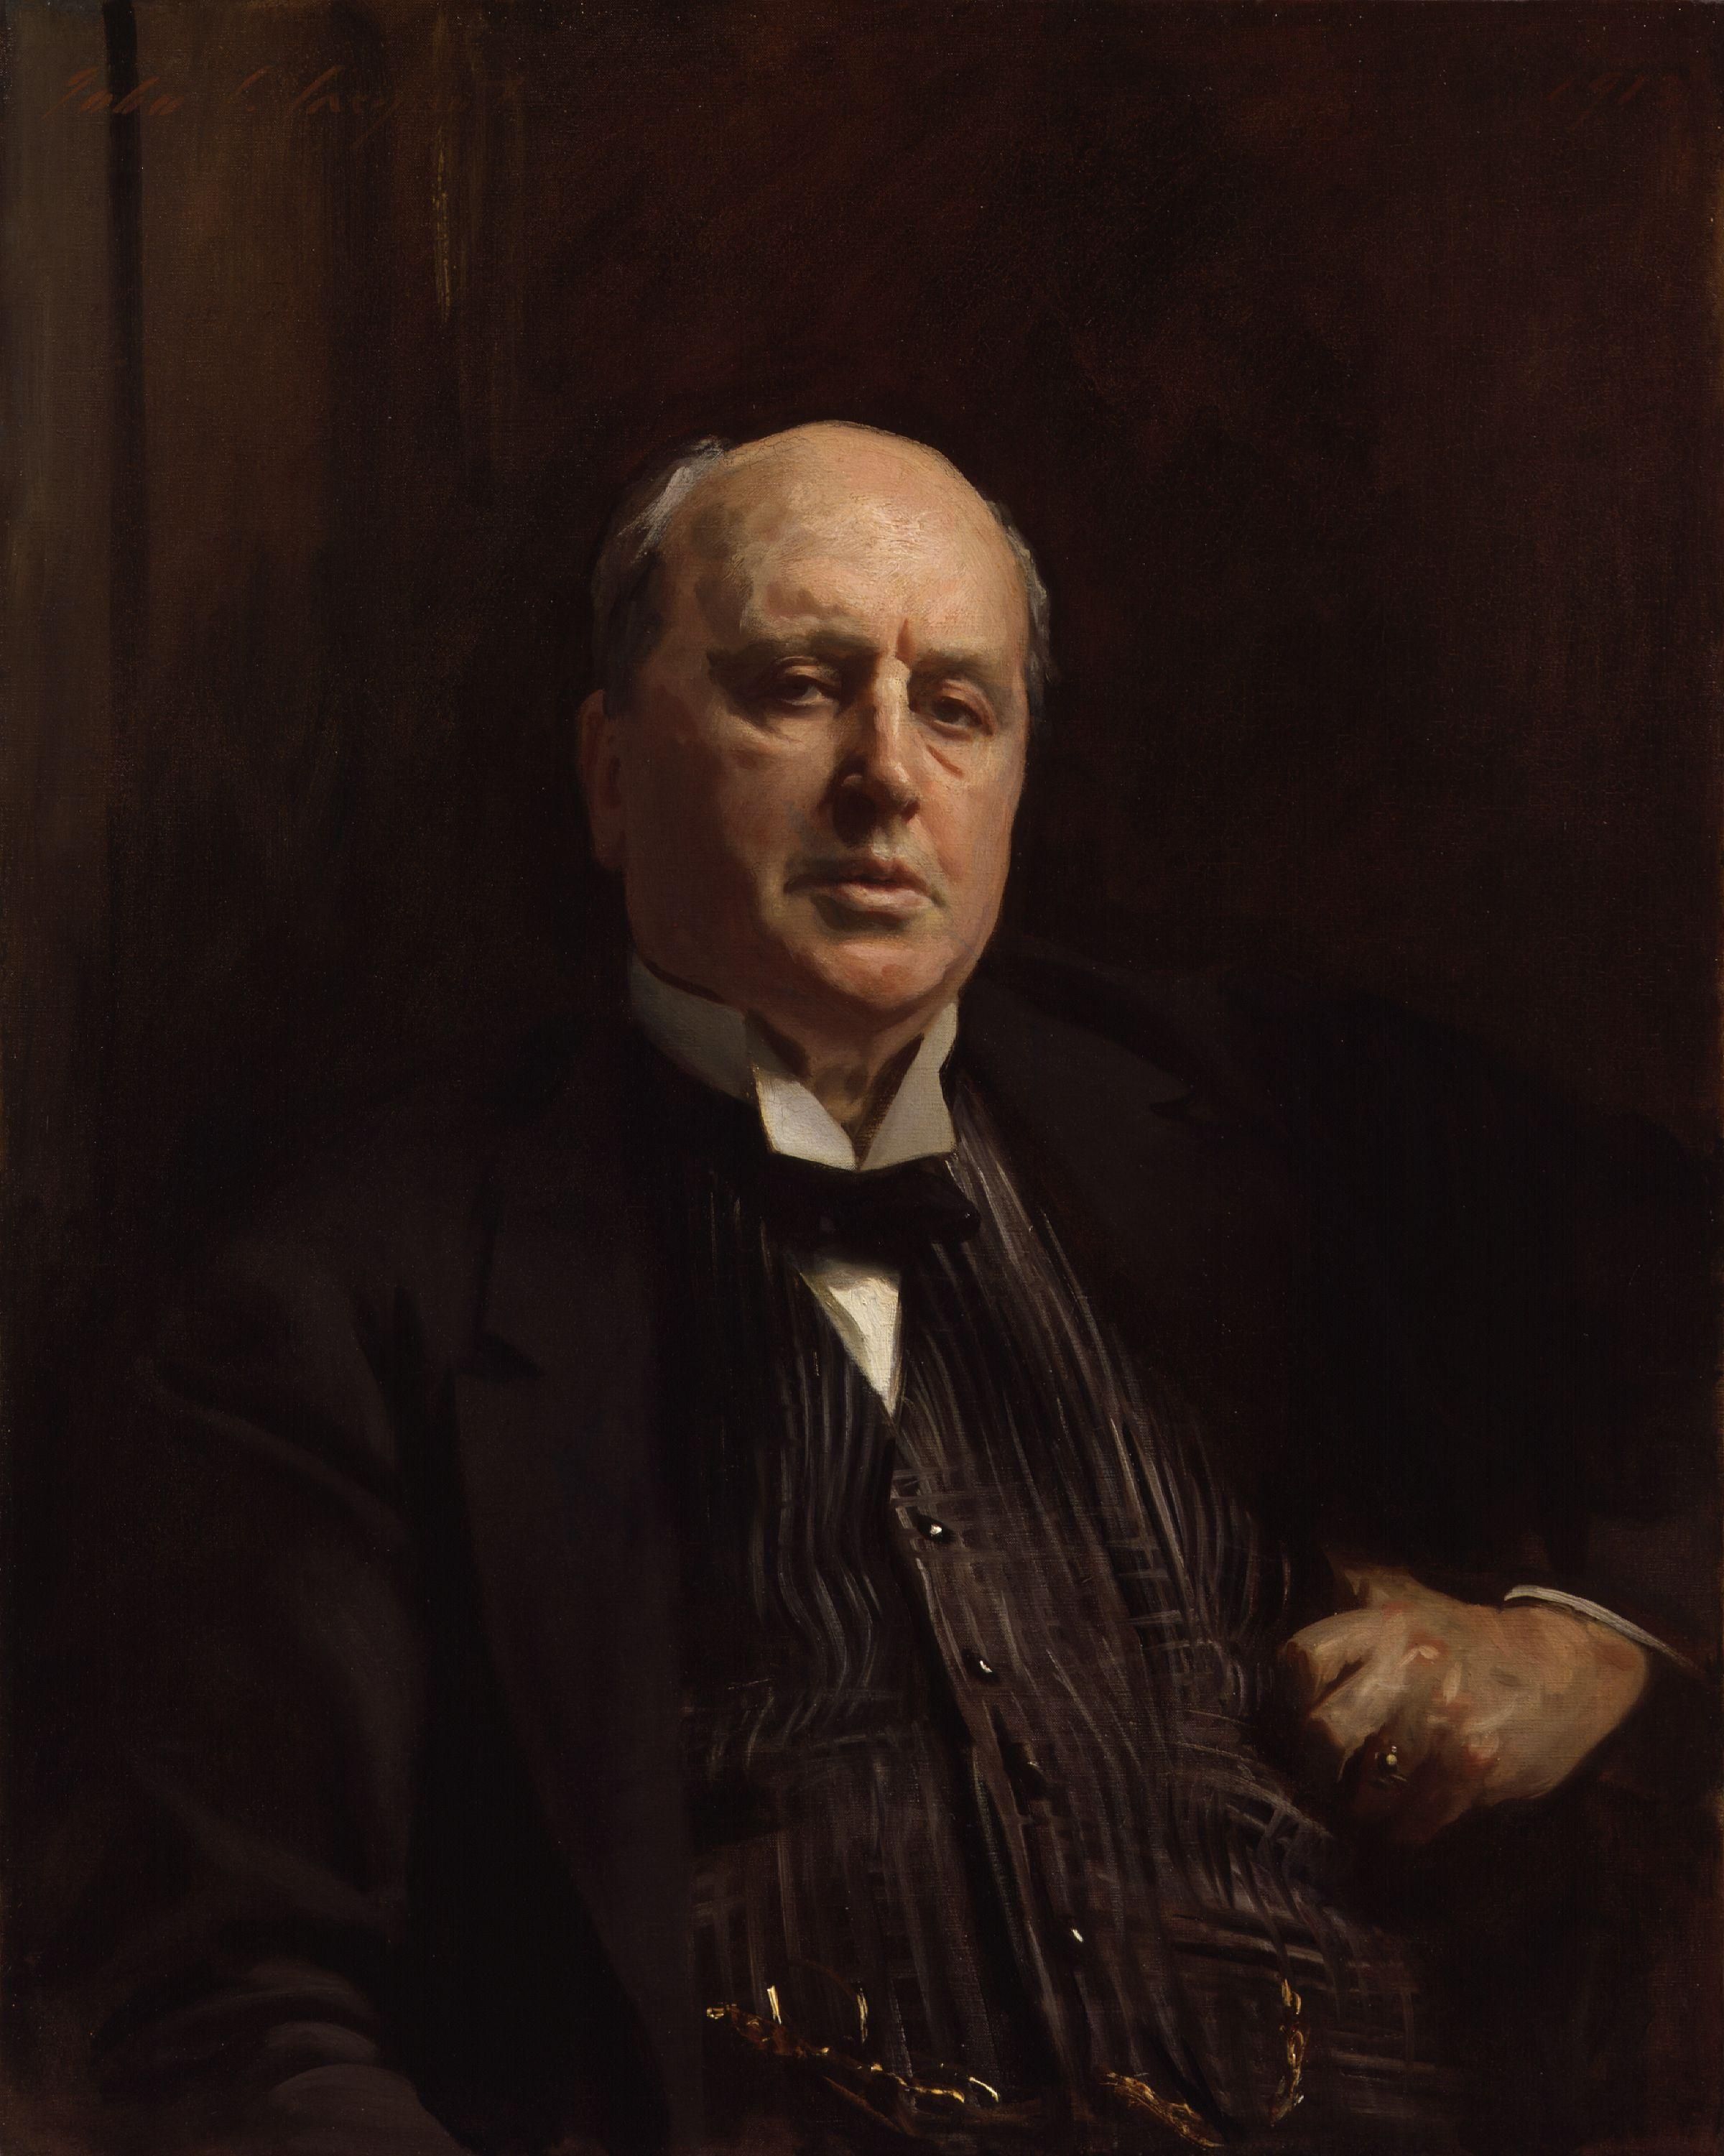 Another Look Event: A Discussion of Henry James’s The Aspern Papers